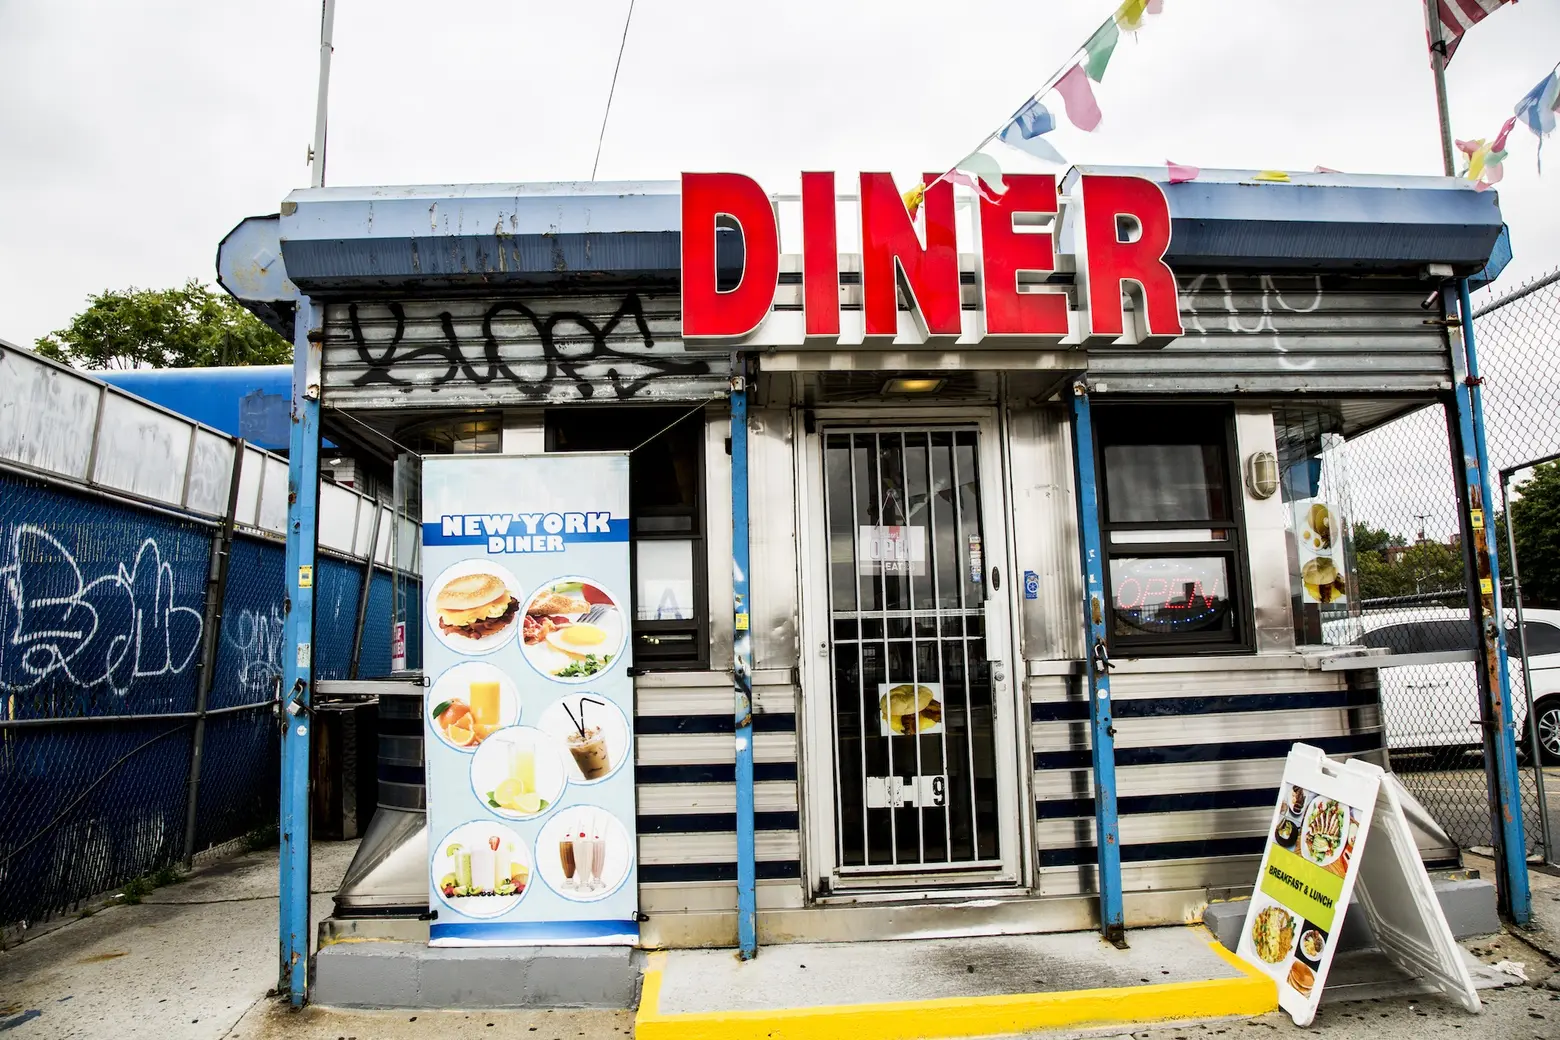 Diners of NYC, Riley Arthur, Diner photography